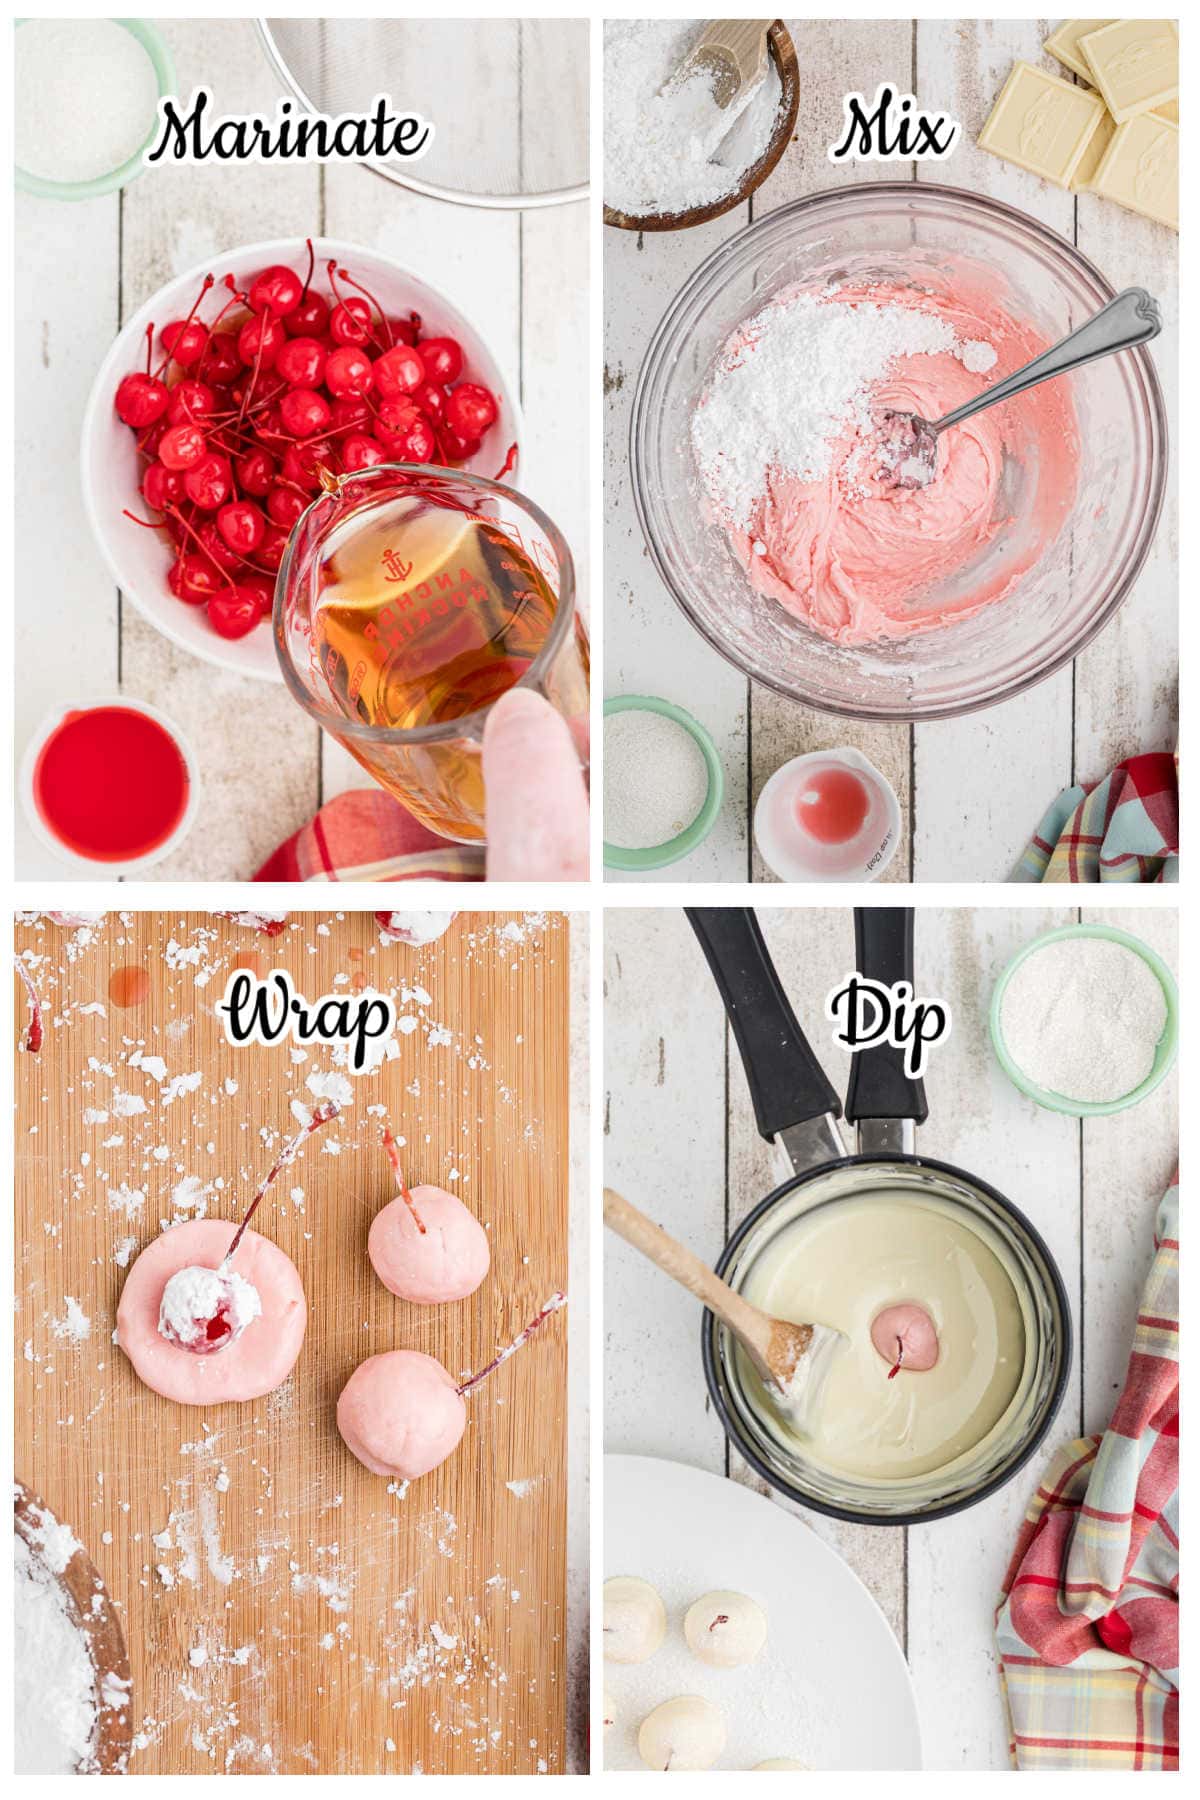 Step by step images showing how to make the cherries.